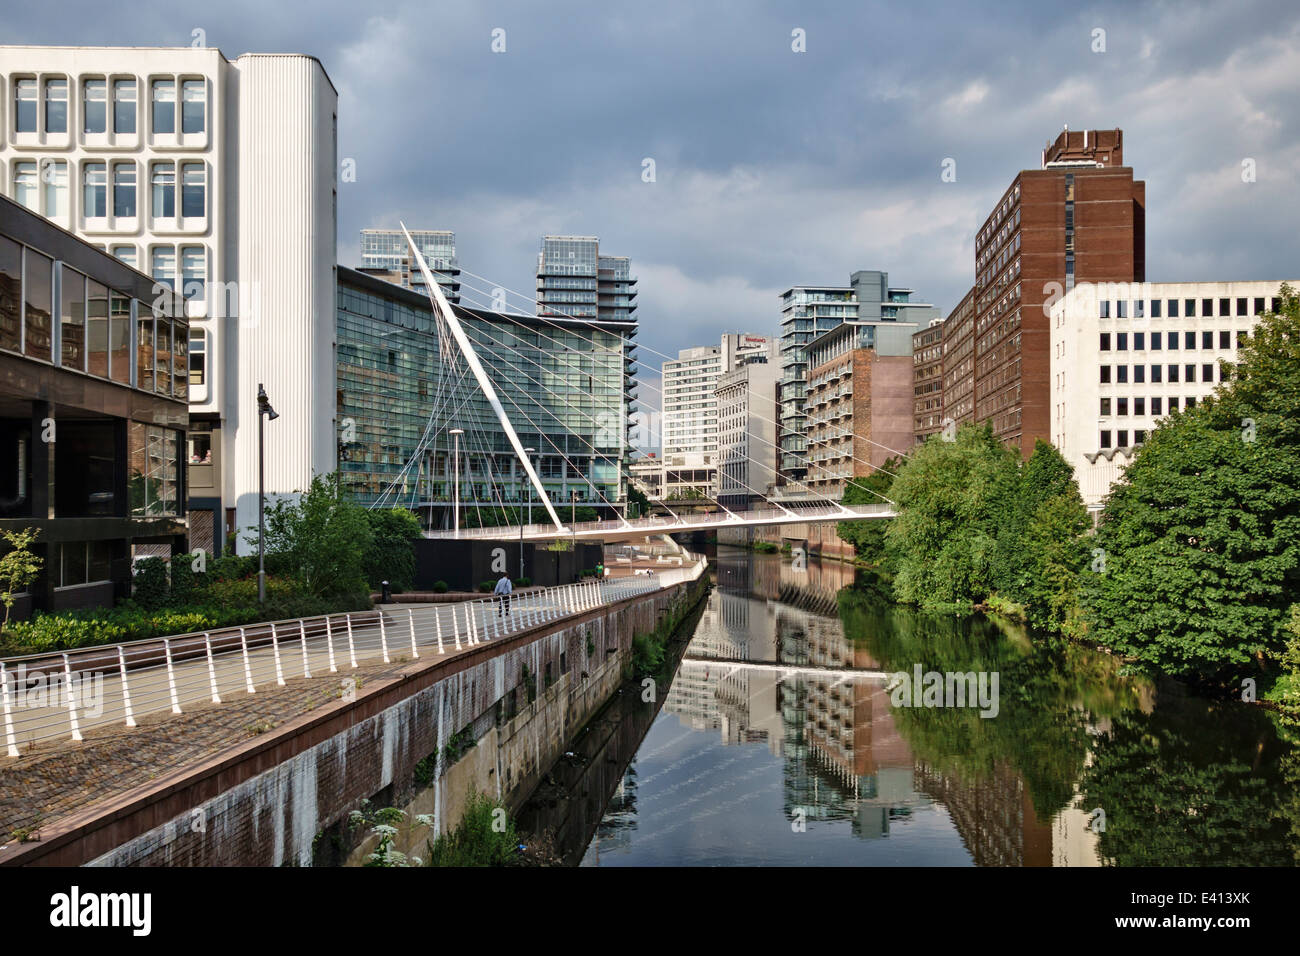 Manchester, UK. The Lowry Hotel and Trinity Bridge over the River Irwell between Salford and Manchester Stock Photo